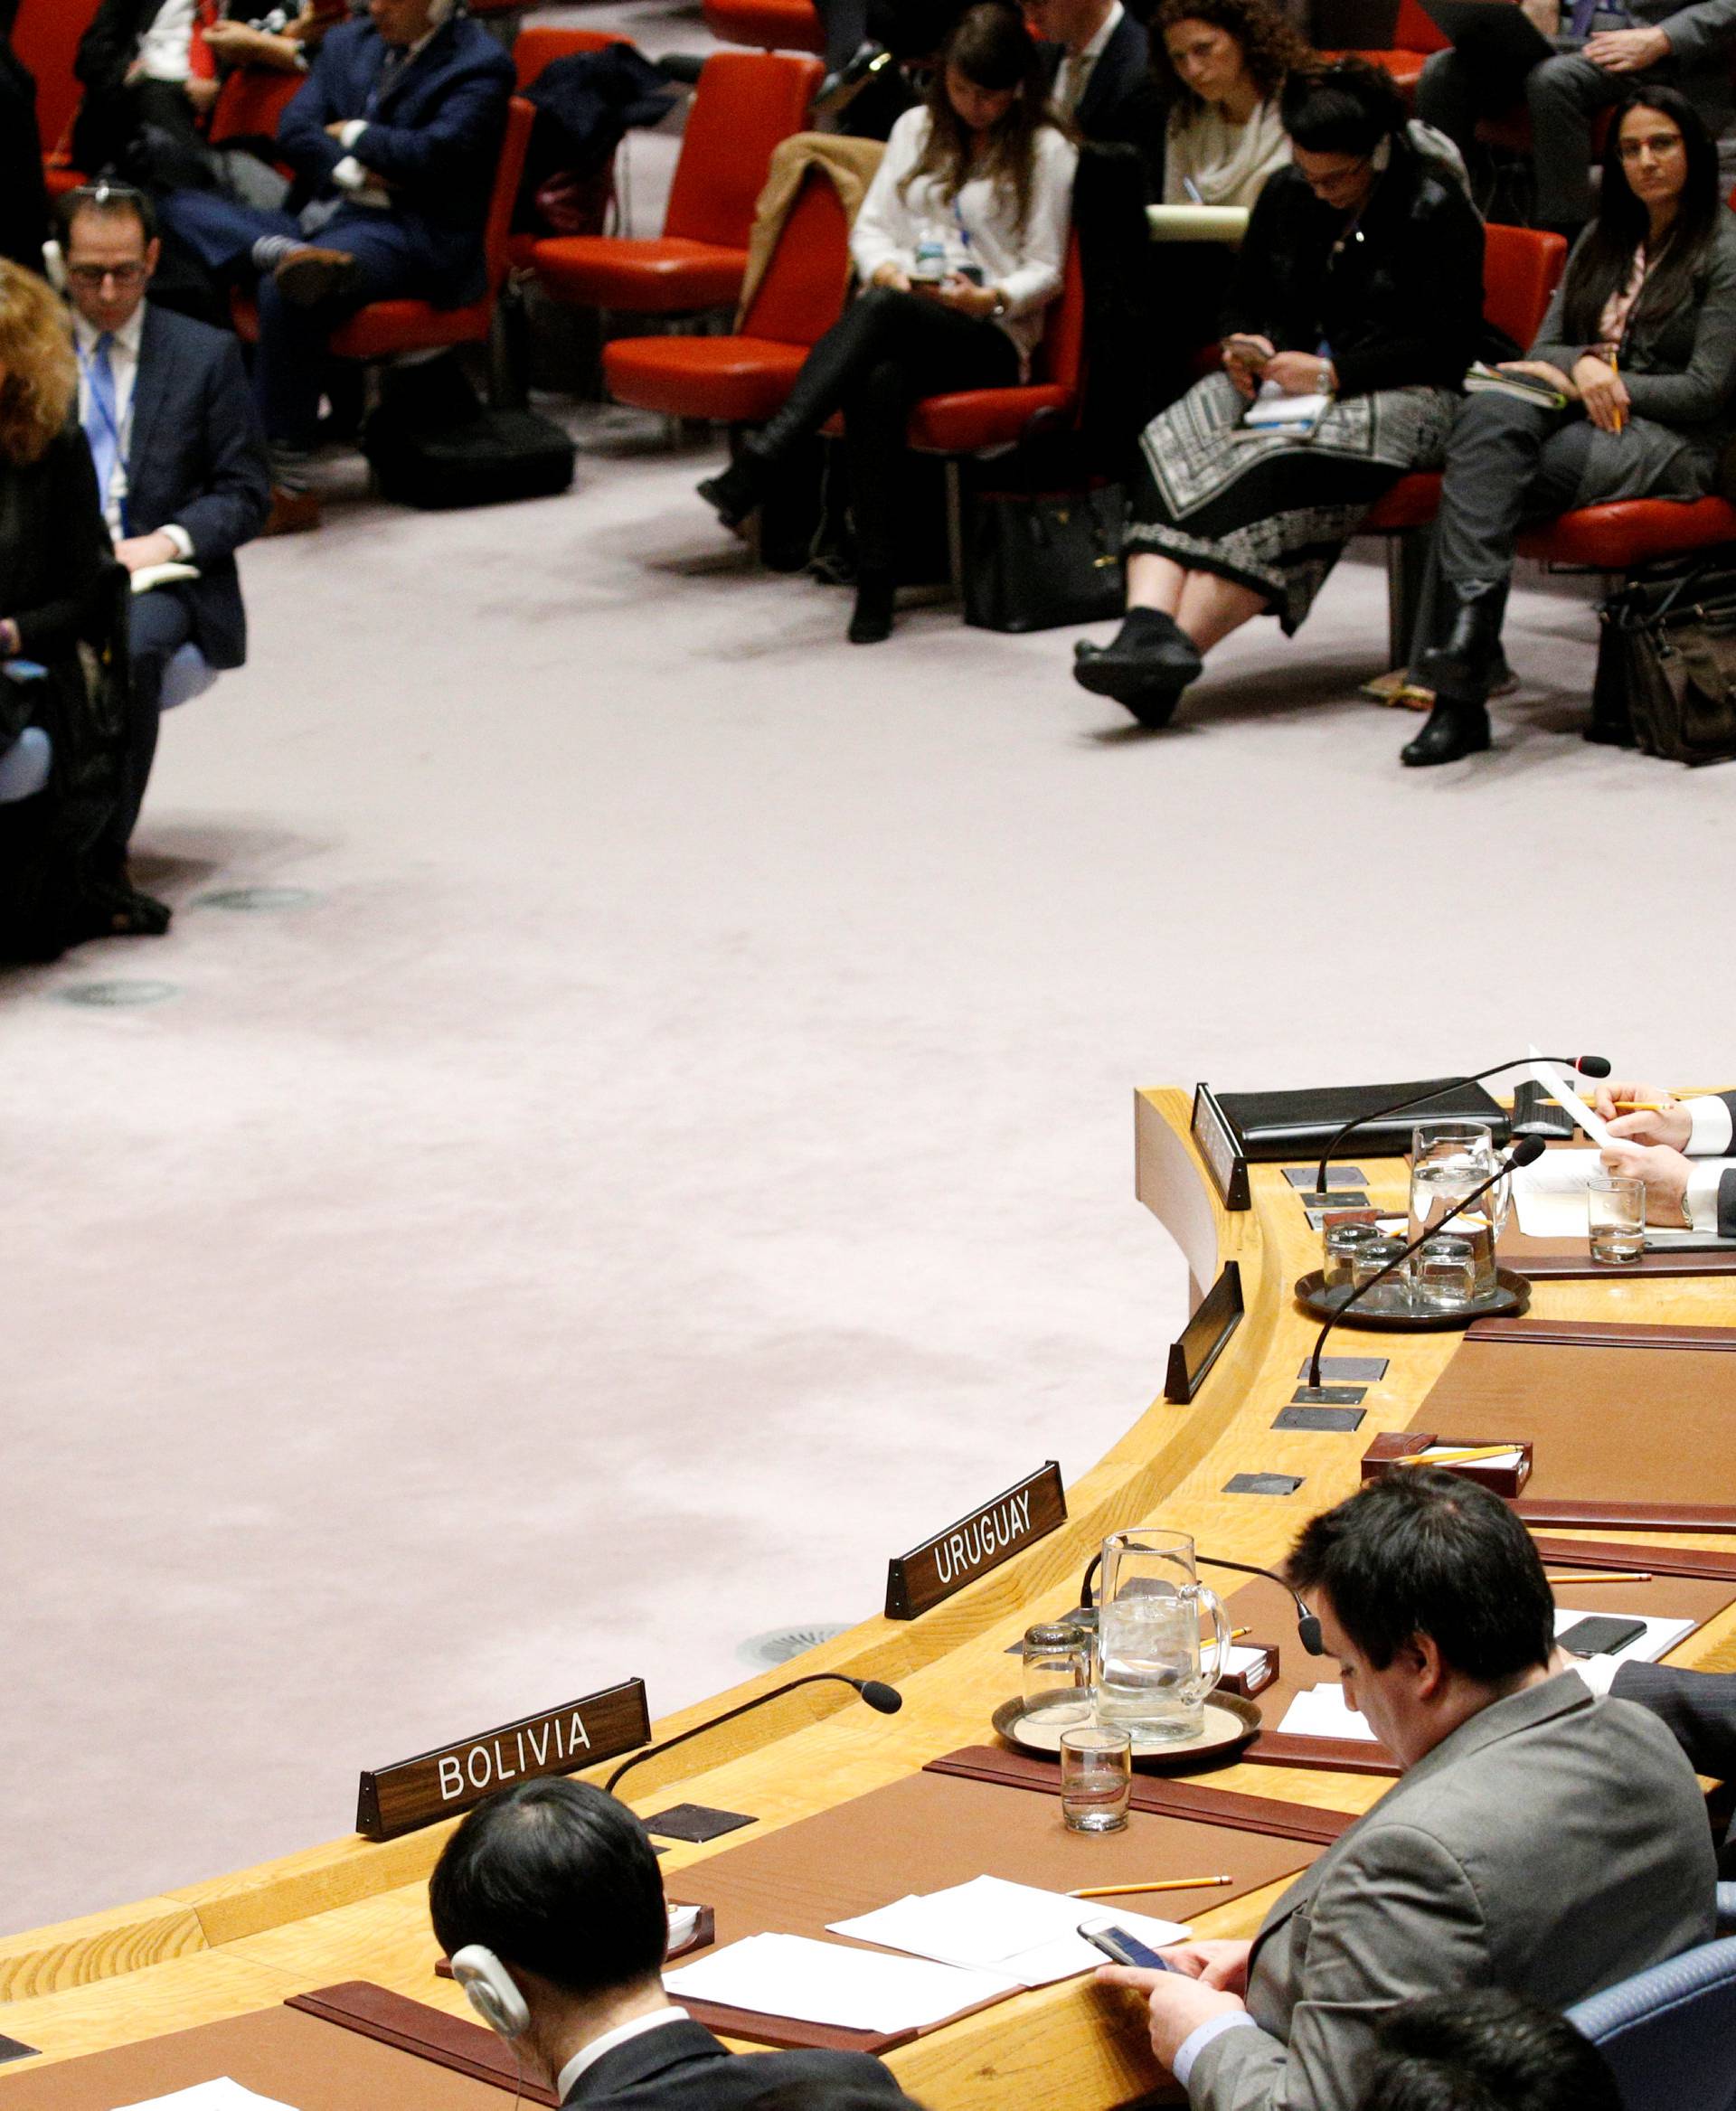 Permanent Observer for the State of Palestine to the U.N., Riyad Mansour speaks during the United Nations Security Council meeting on the situation in the Middle East, including Palestine, at U.N. Headquarters in New York